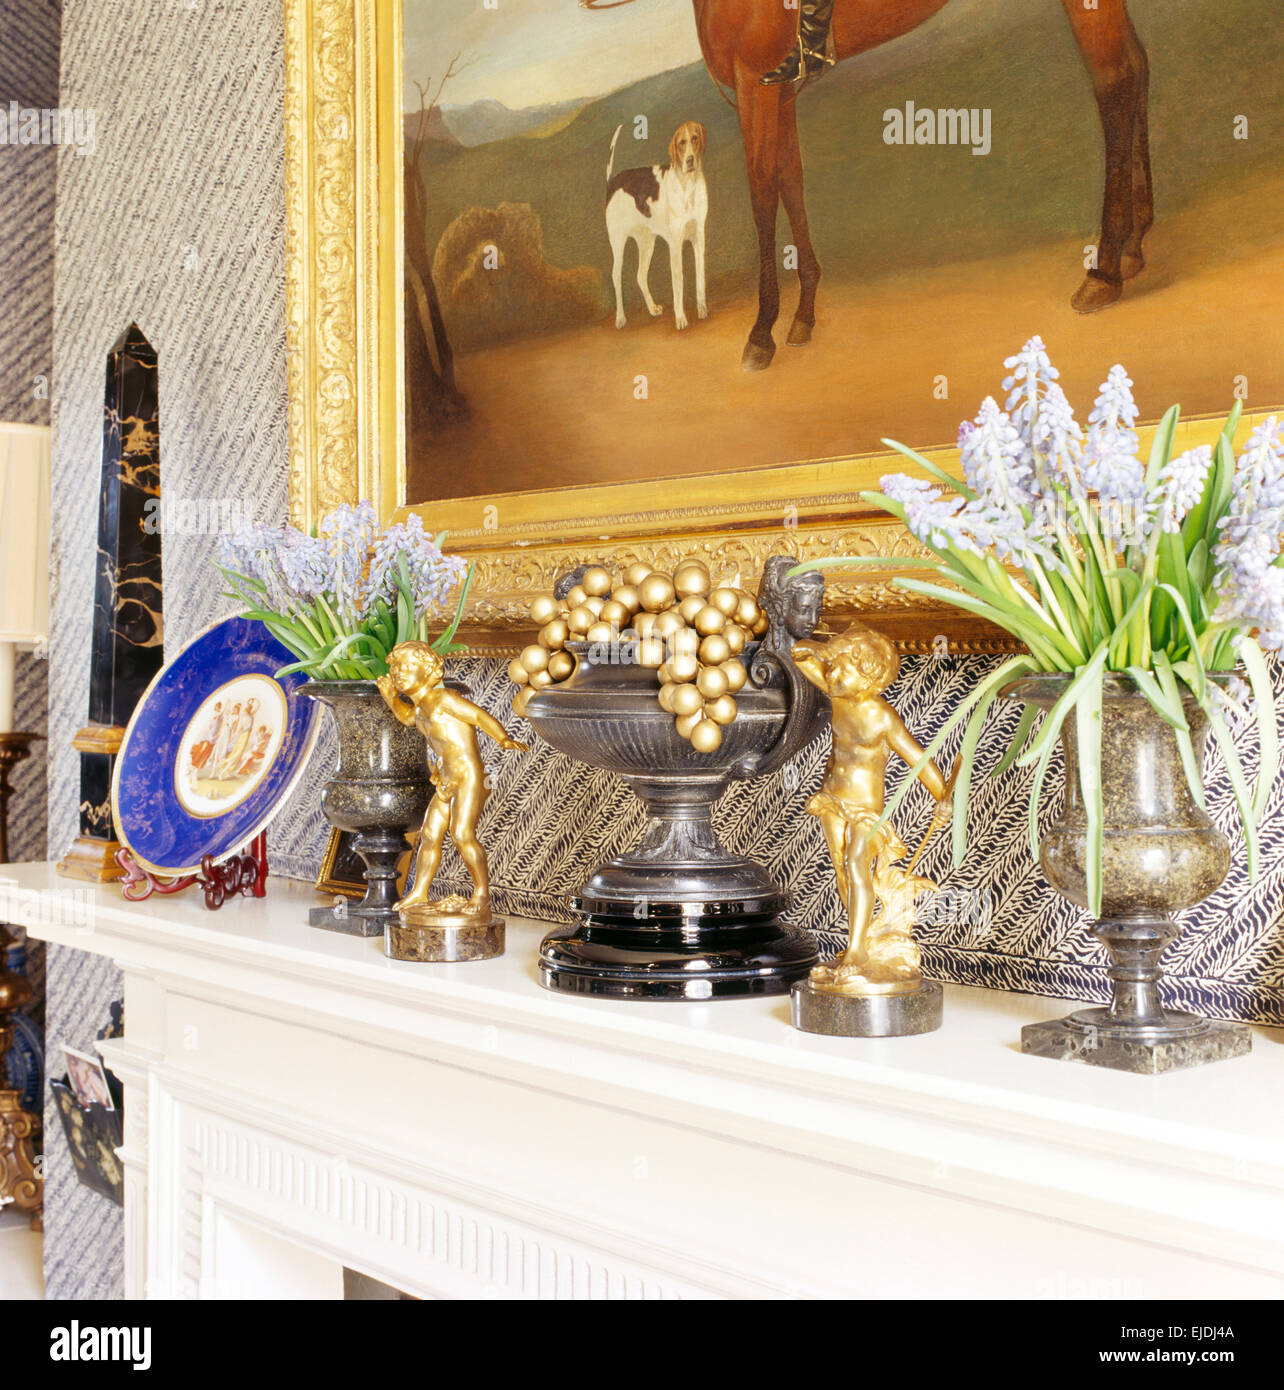 Close-up of small gold statues on mantelpiece with vases of pale blue grape hyacinths Stock Photo